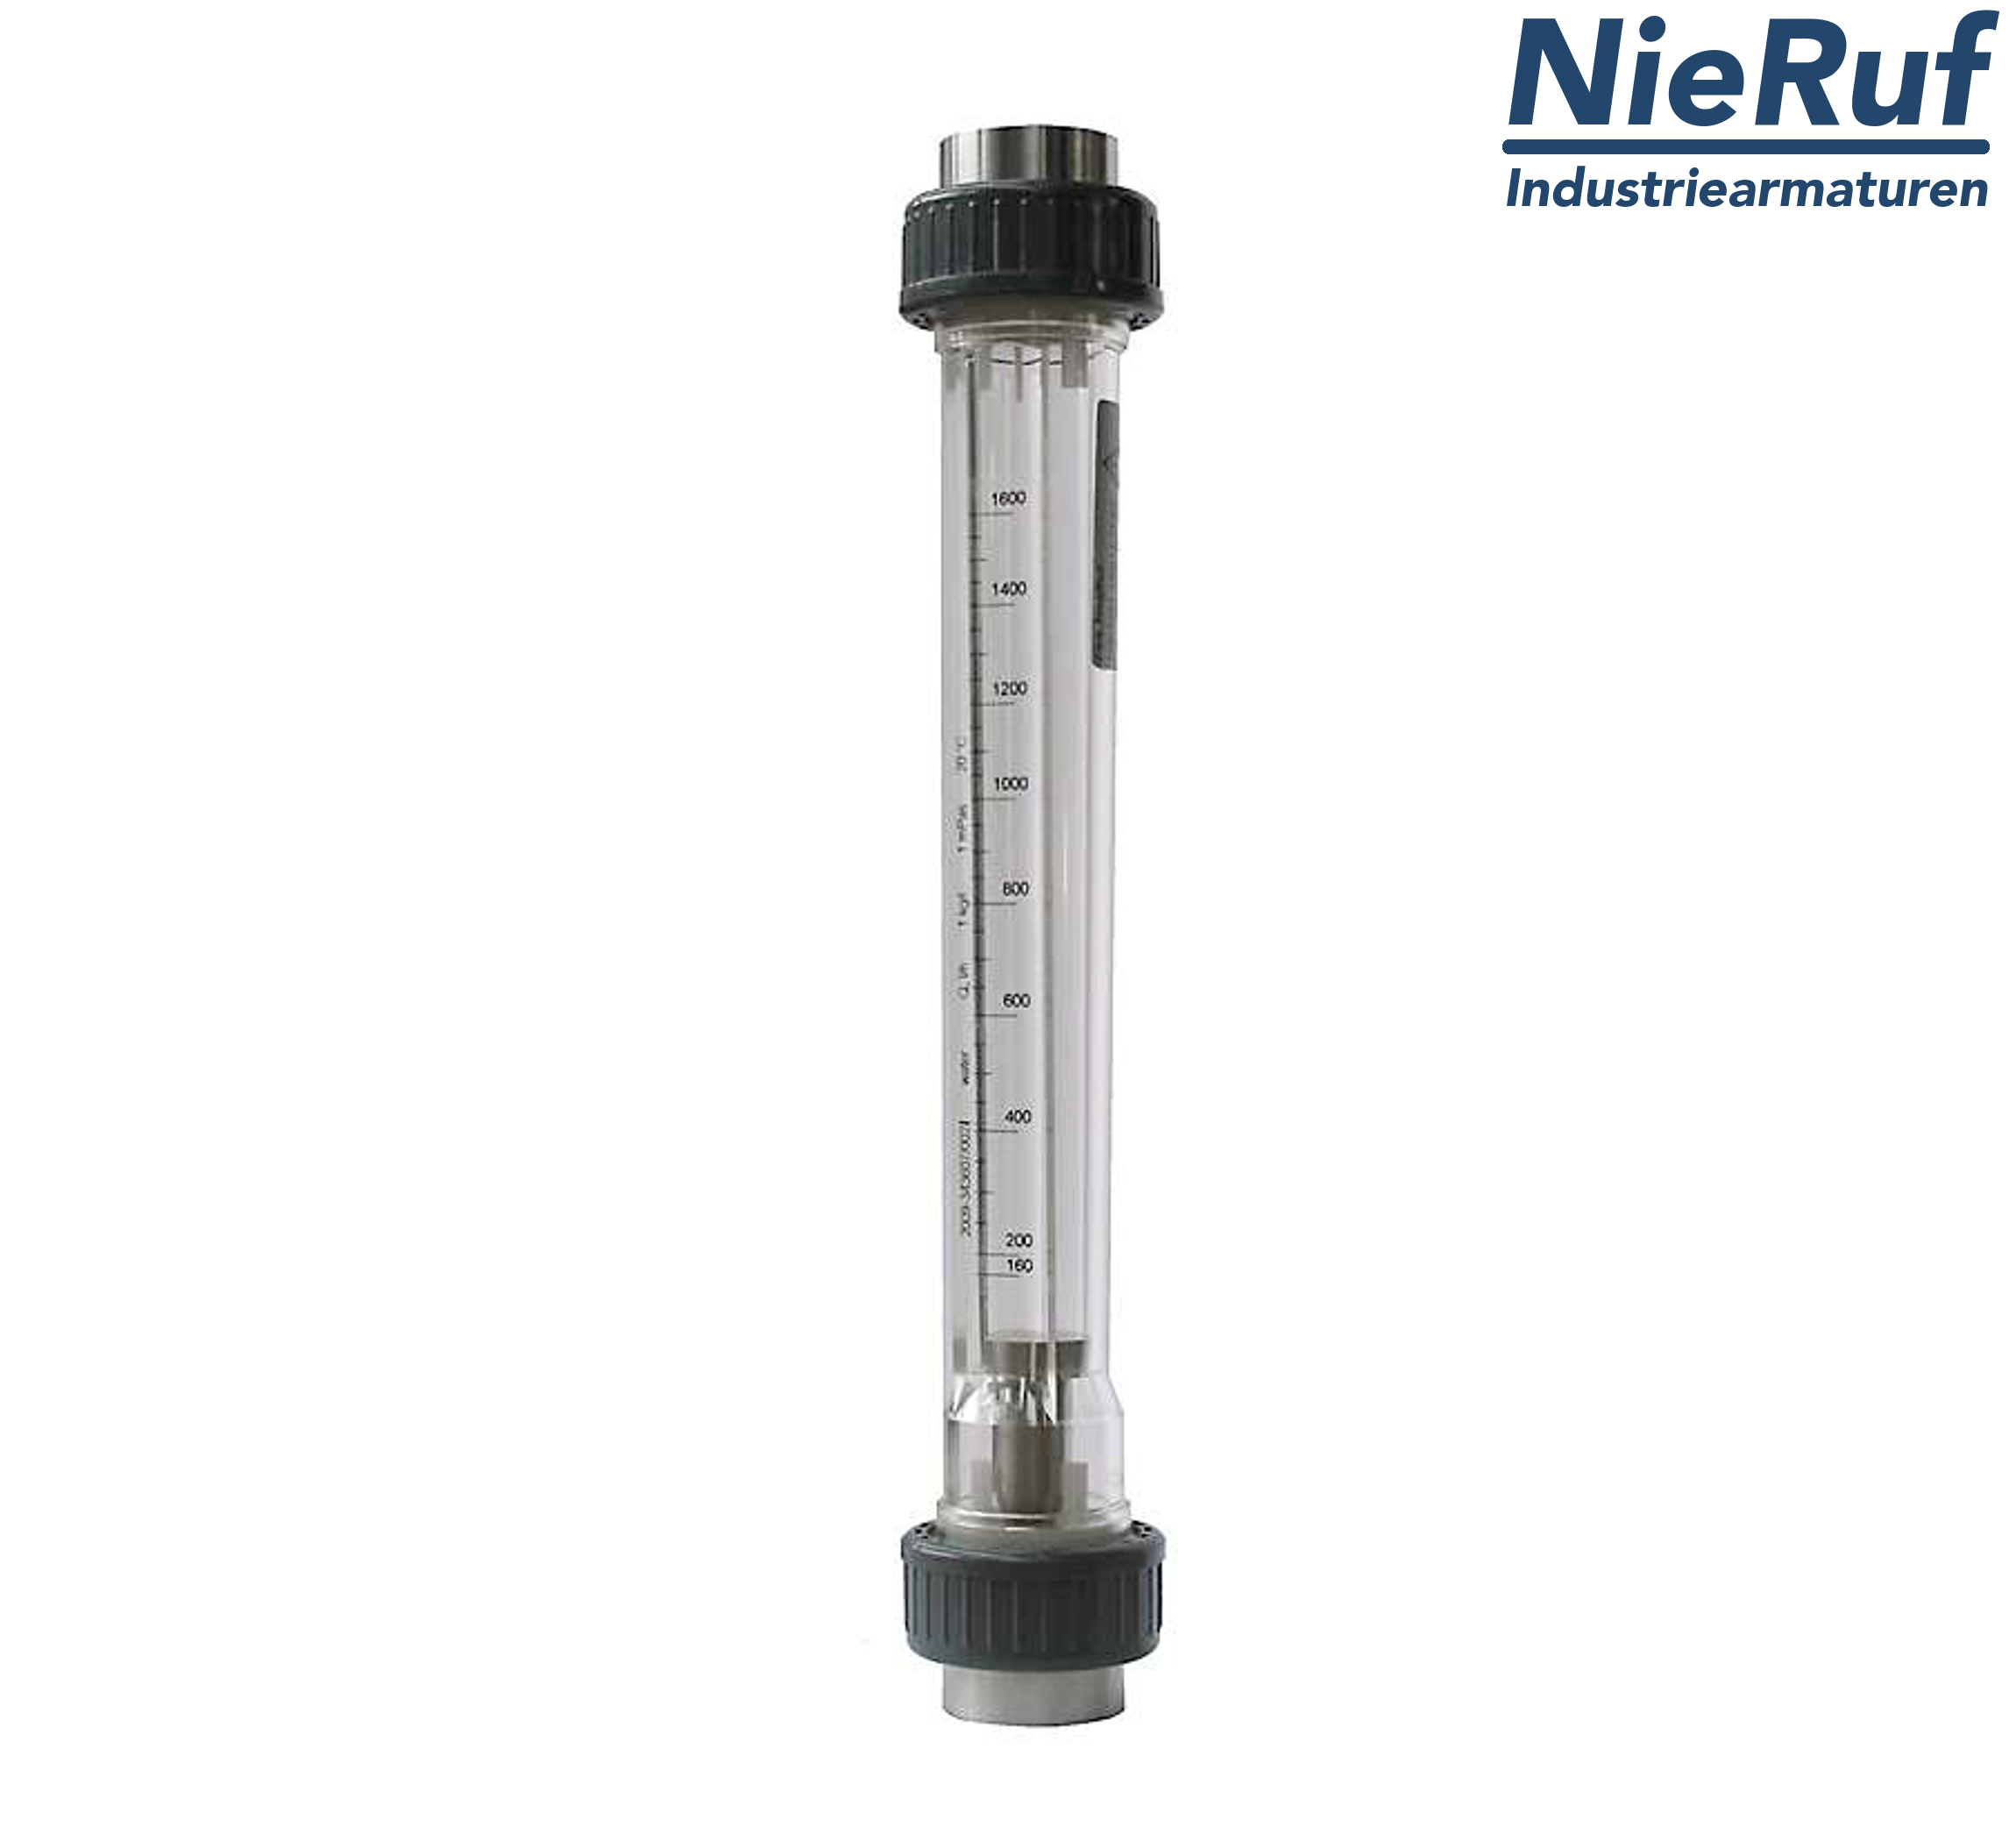 Variable area flowmeter 3/4" inch 100.0 - 1000 l/h water FKM